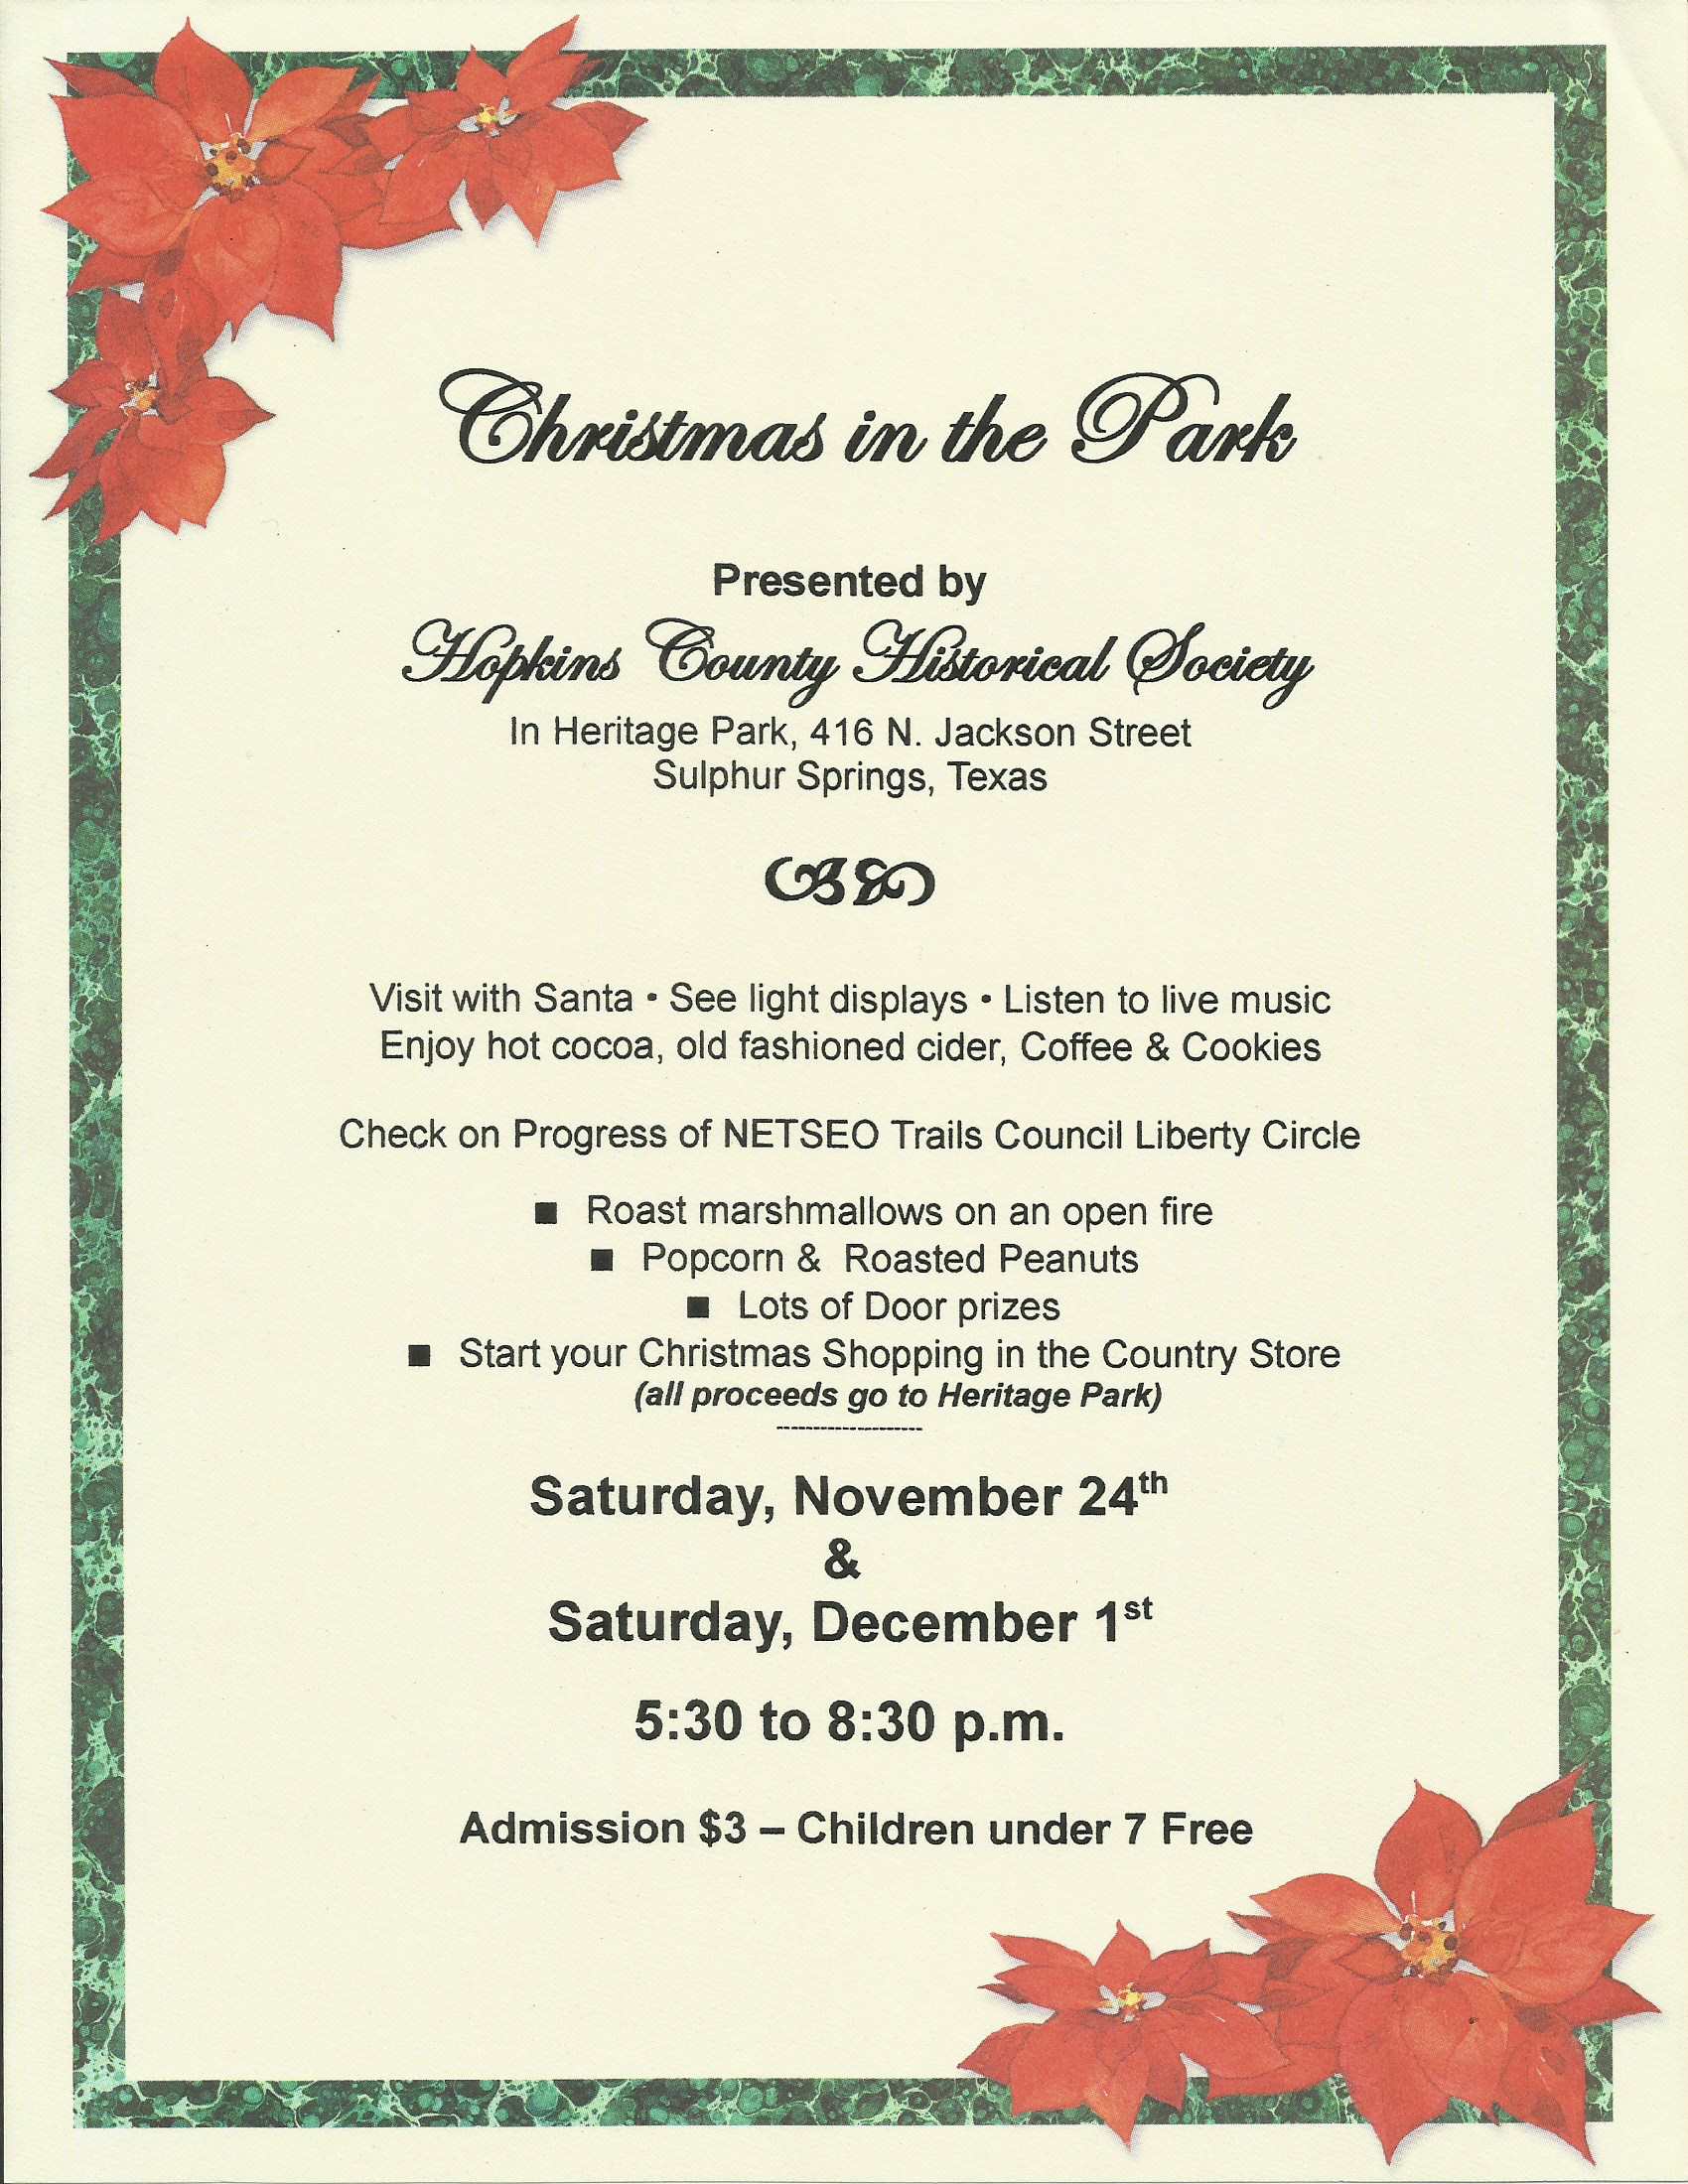 Christmas in the Park at Heritage Park Coming Up on Saturday, November 24th, and Saturday, December 1st